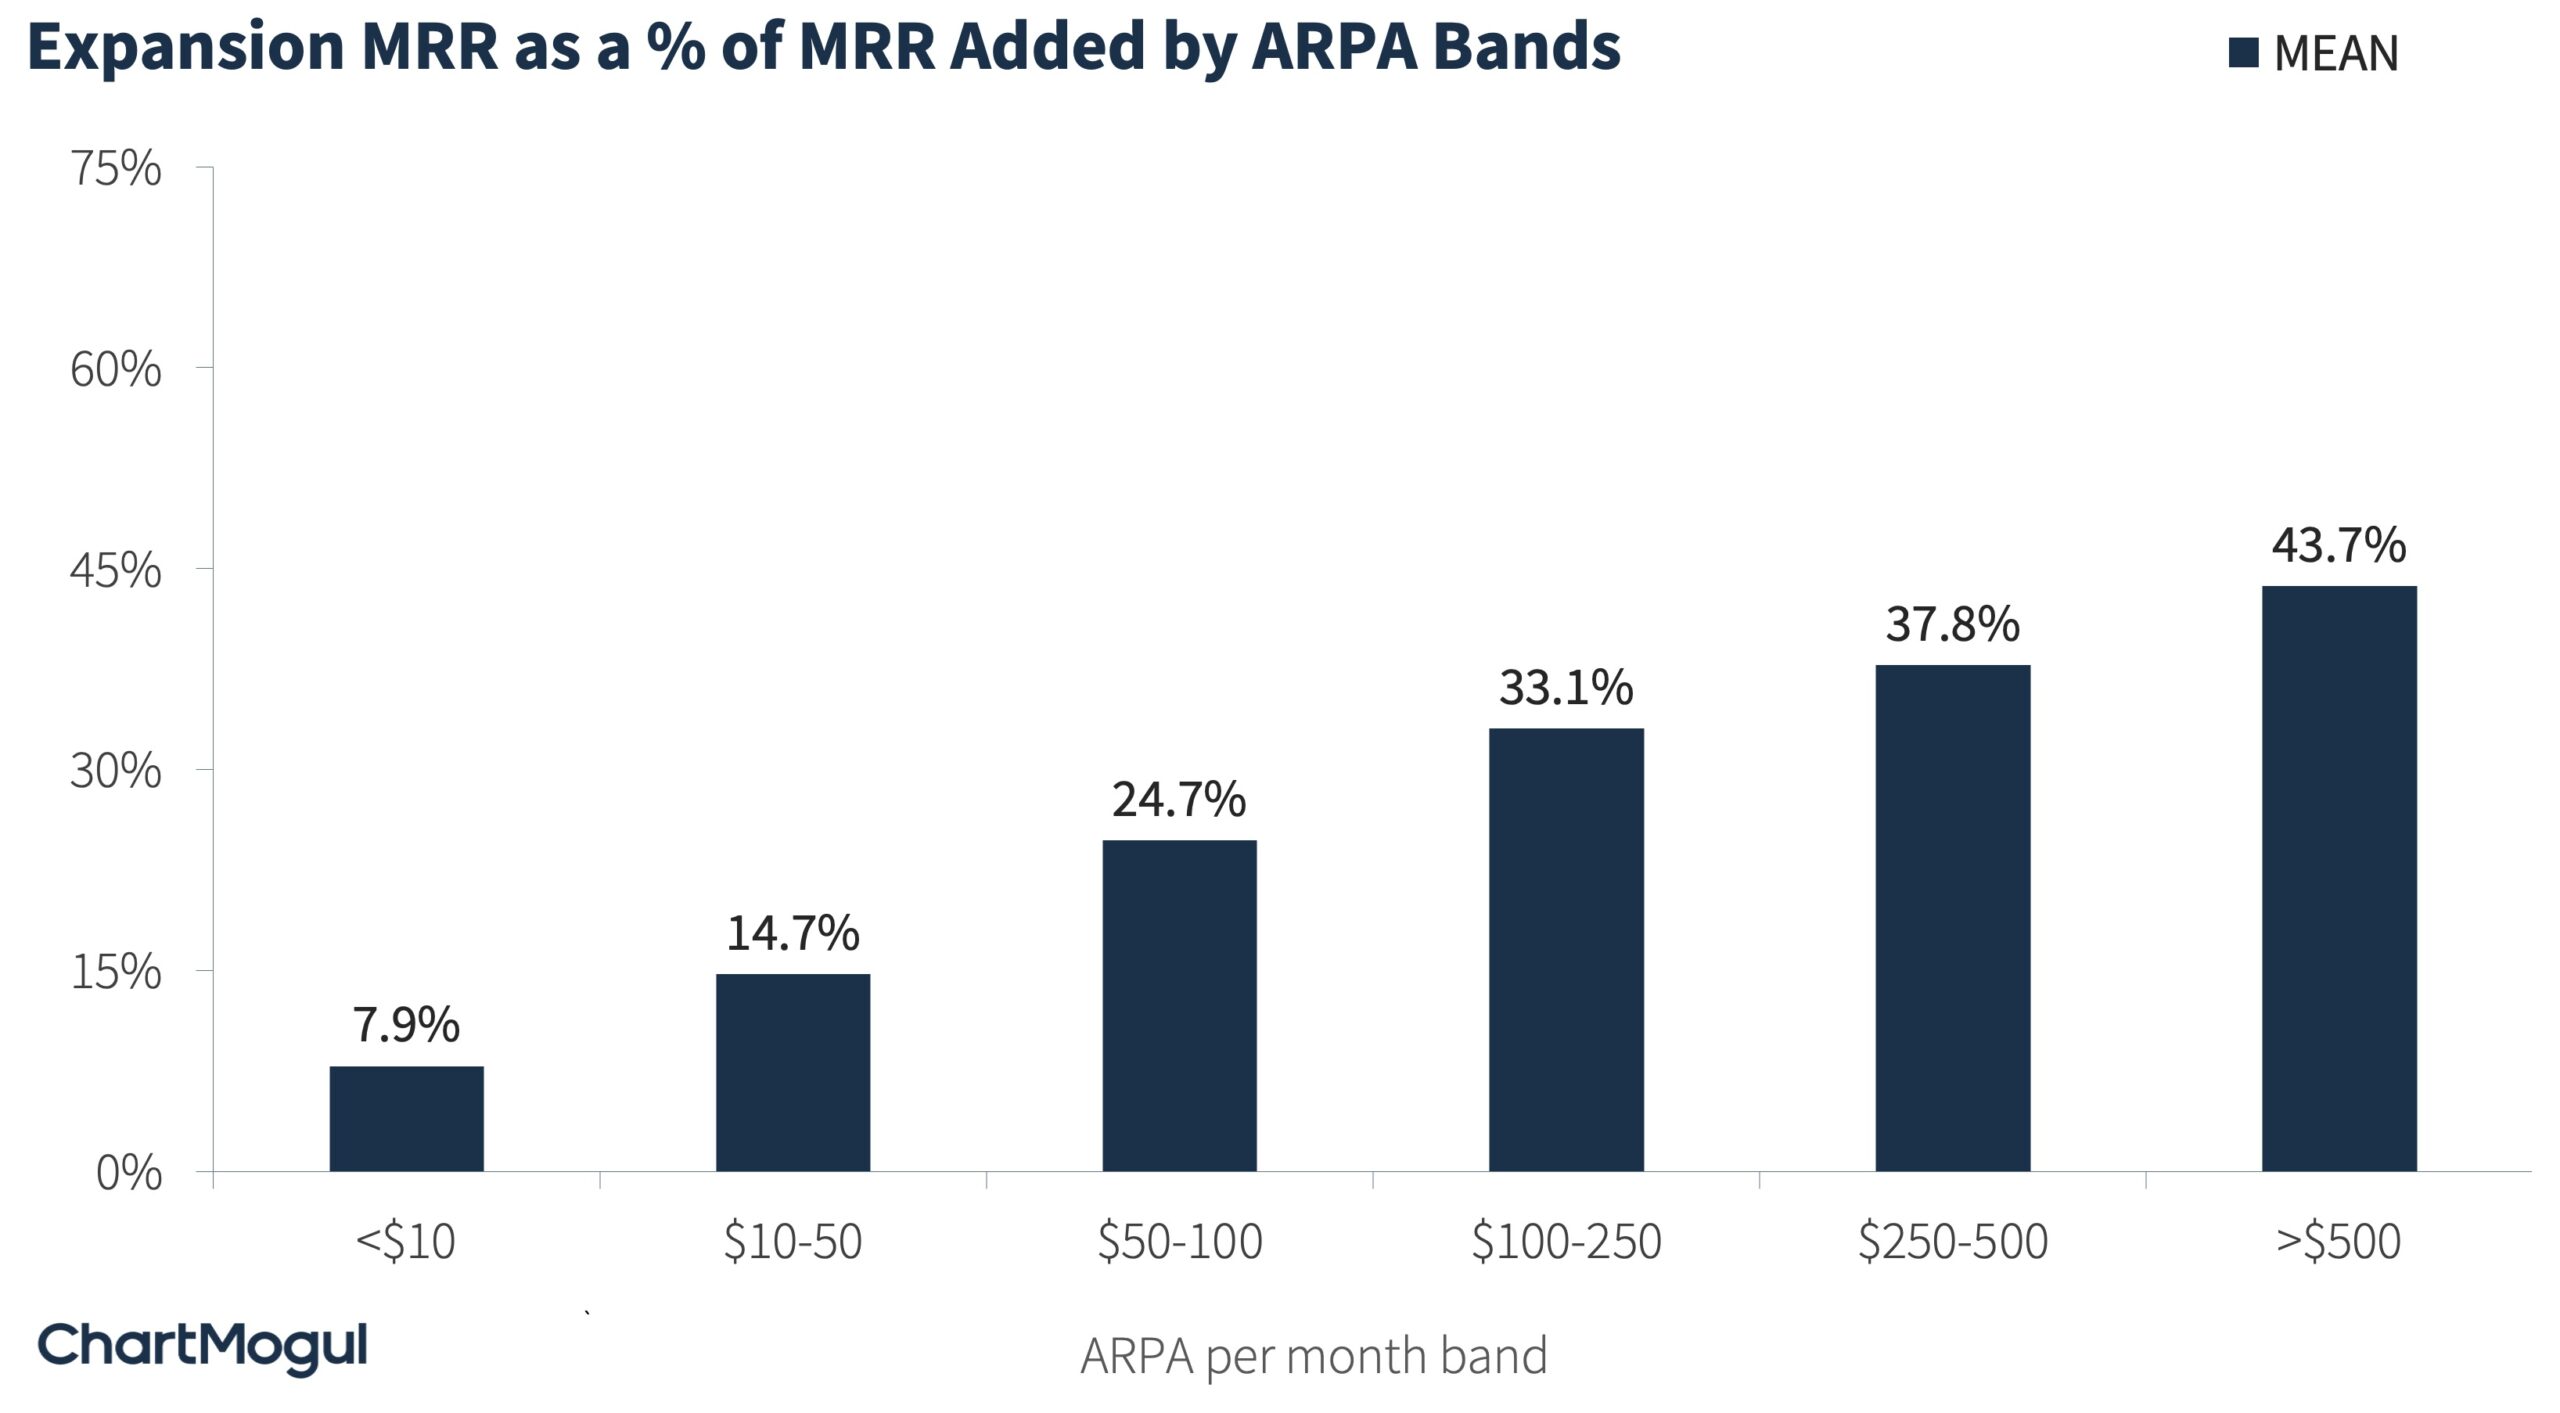 Expansion MRR as a % of MRR Added by ARPA Bands